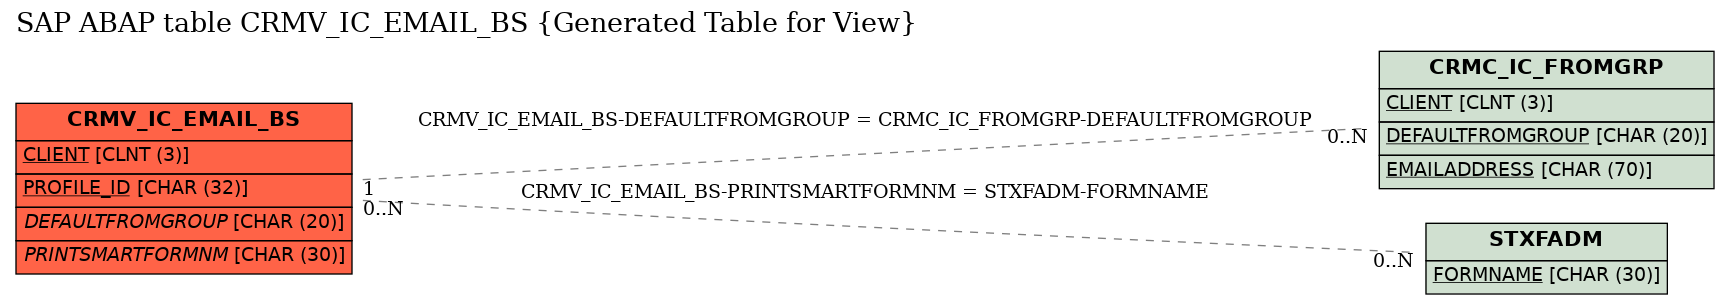 E-R Diagram for table CRMV_IC_EMAIL_BS (Generated Table for View)